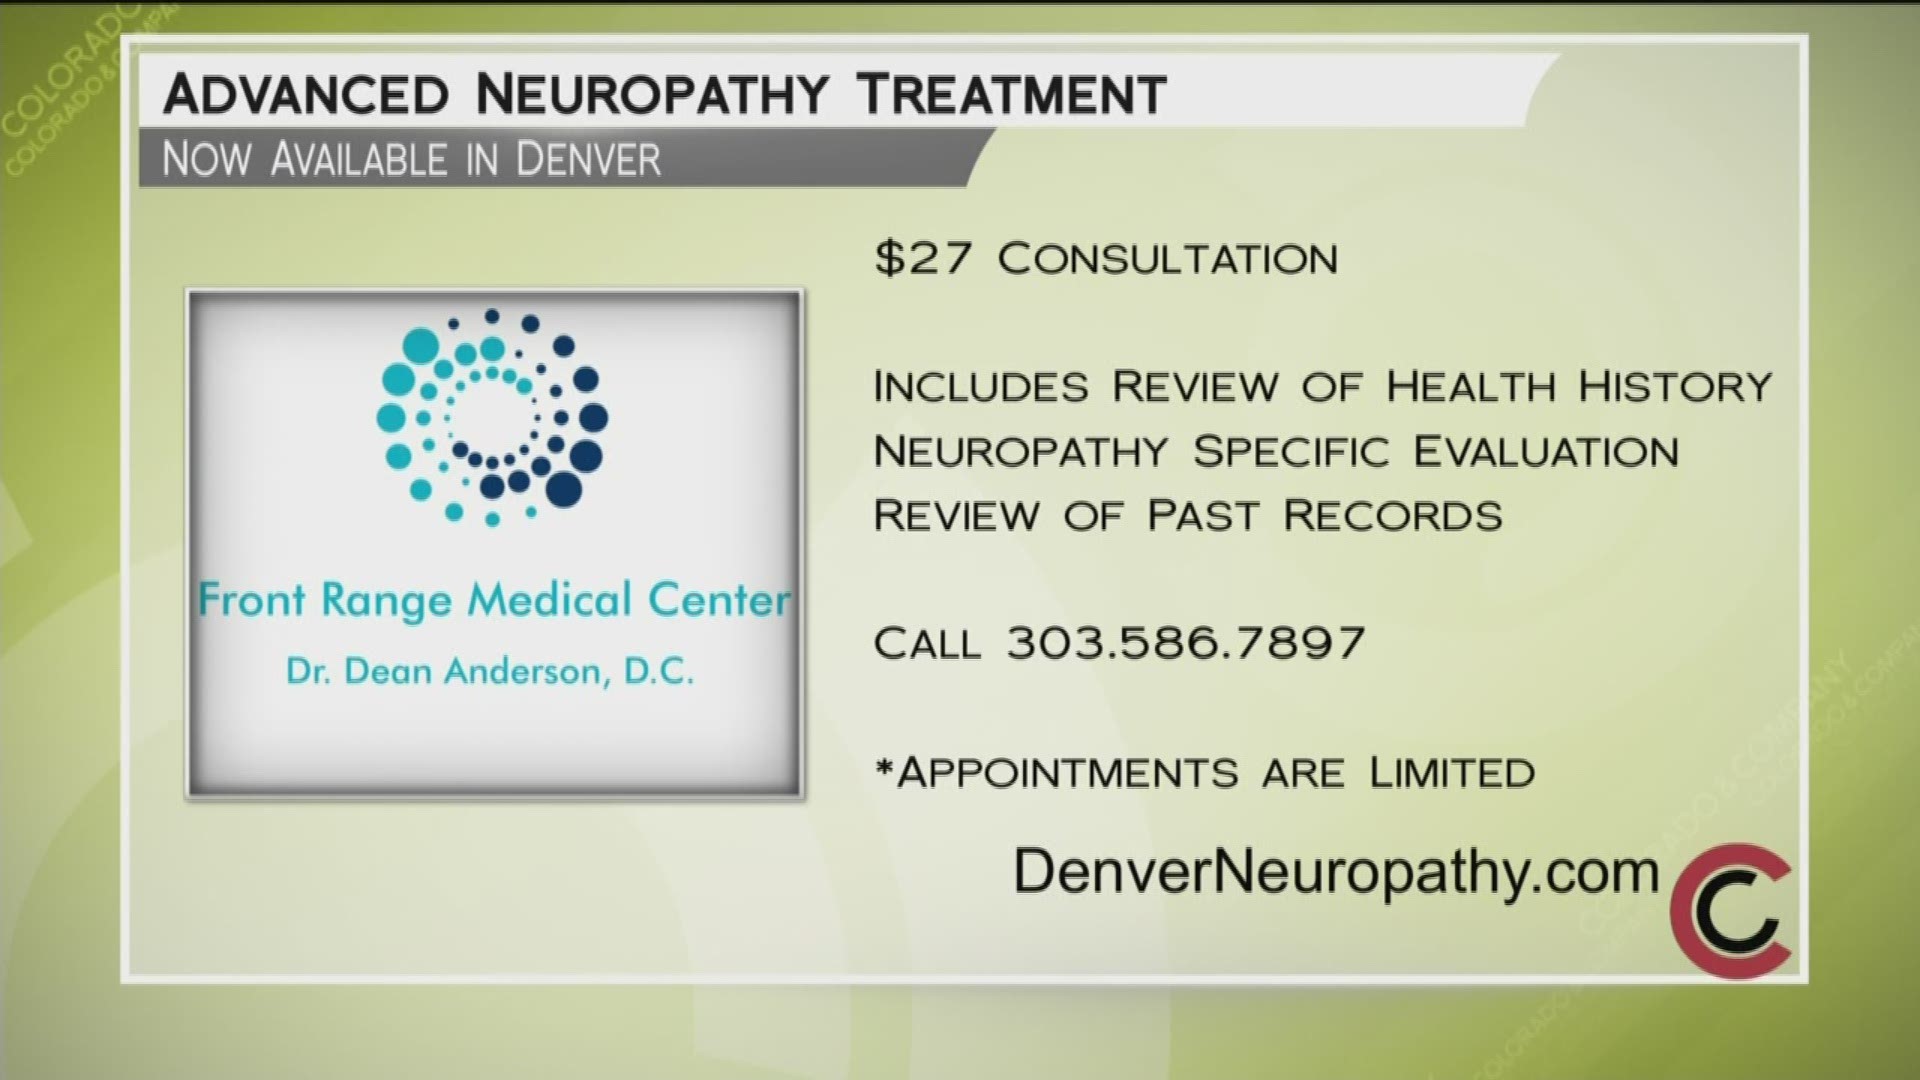 Schedule your consultation with Dr. Anderson. It’s only $27 when you mention Colorado and Company. Call 303.586.7897 or visit DenverNeuropathy.com to learn more.